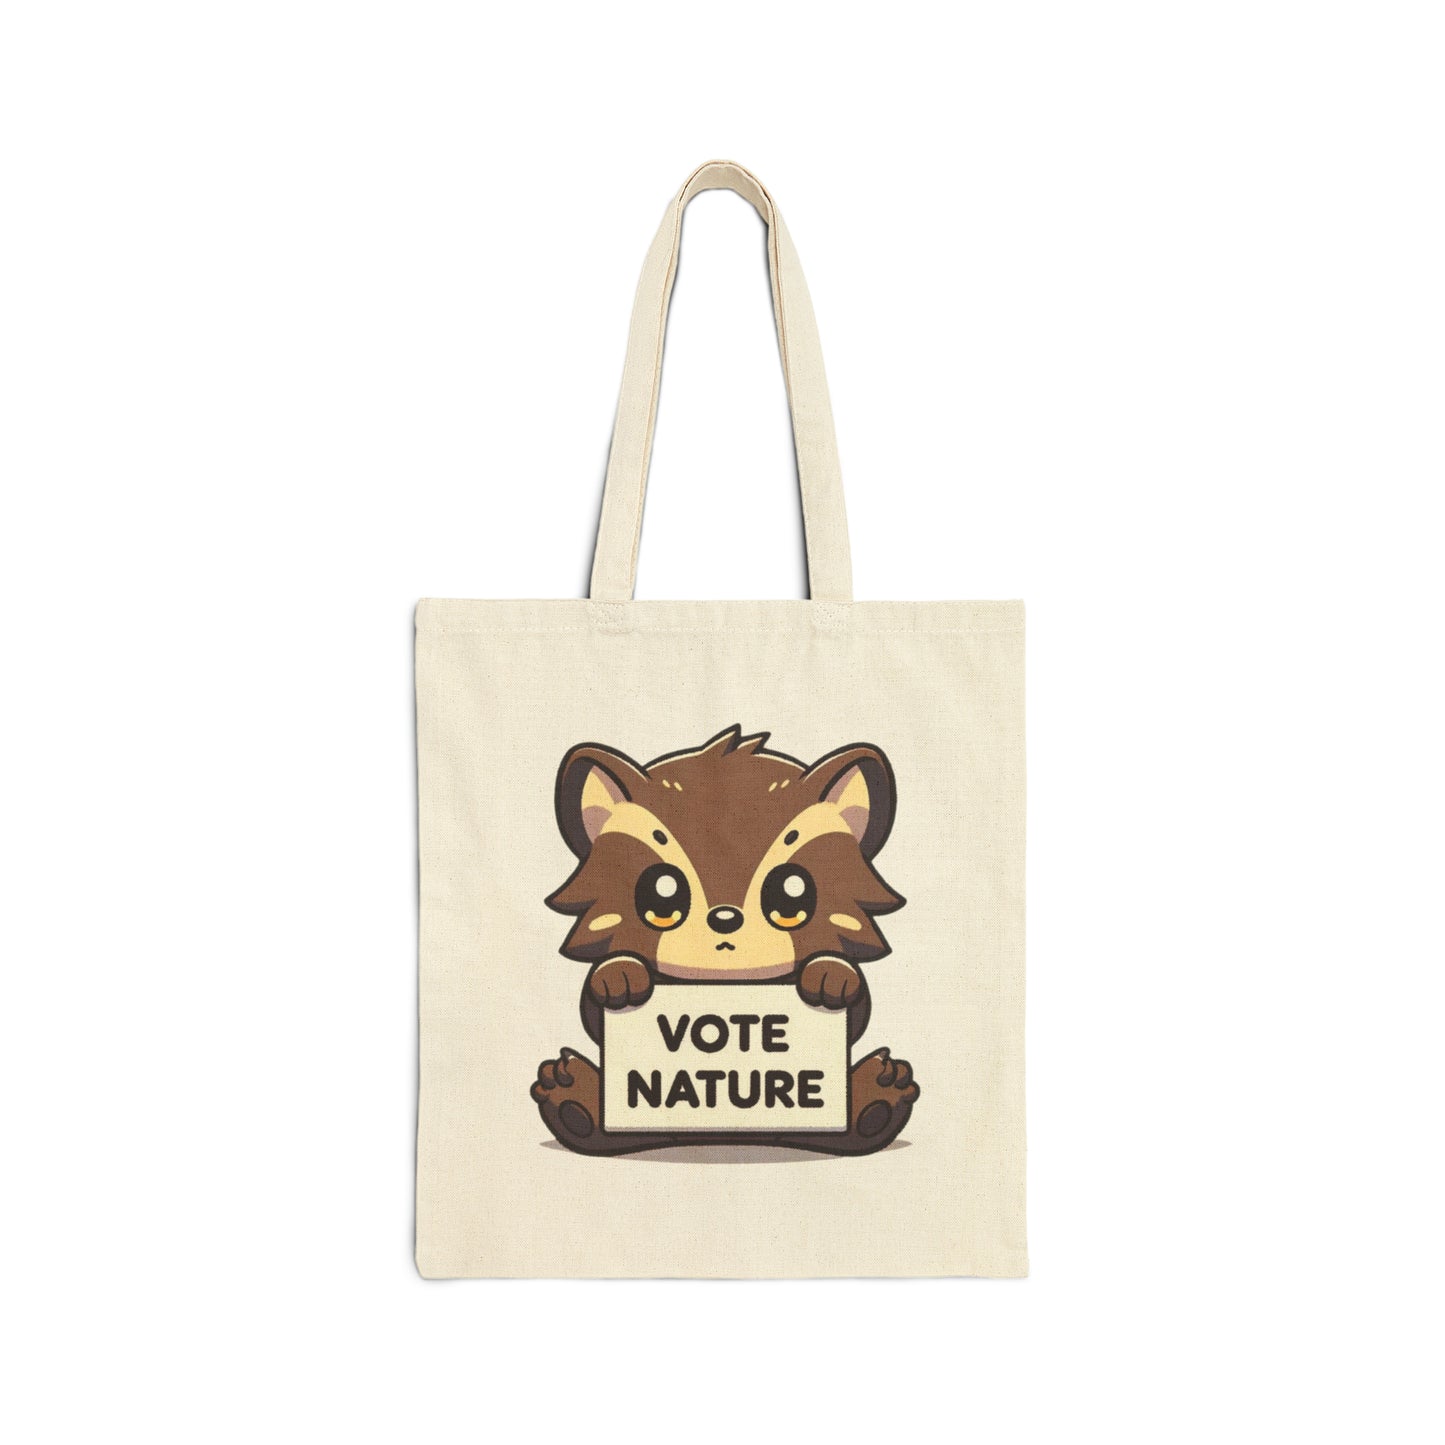 Inspirational Cute Wolverine Statement Cotton Canvas Tote Bag: Vote Nature! carry a laptop, kindle, notebook, goodies to work/coffee shop